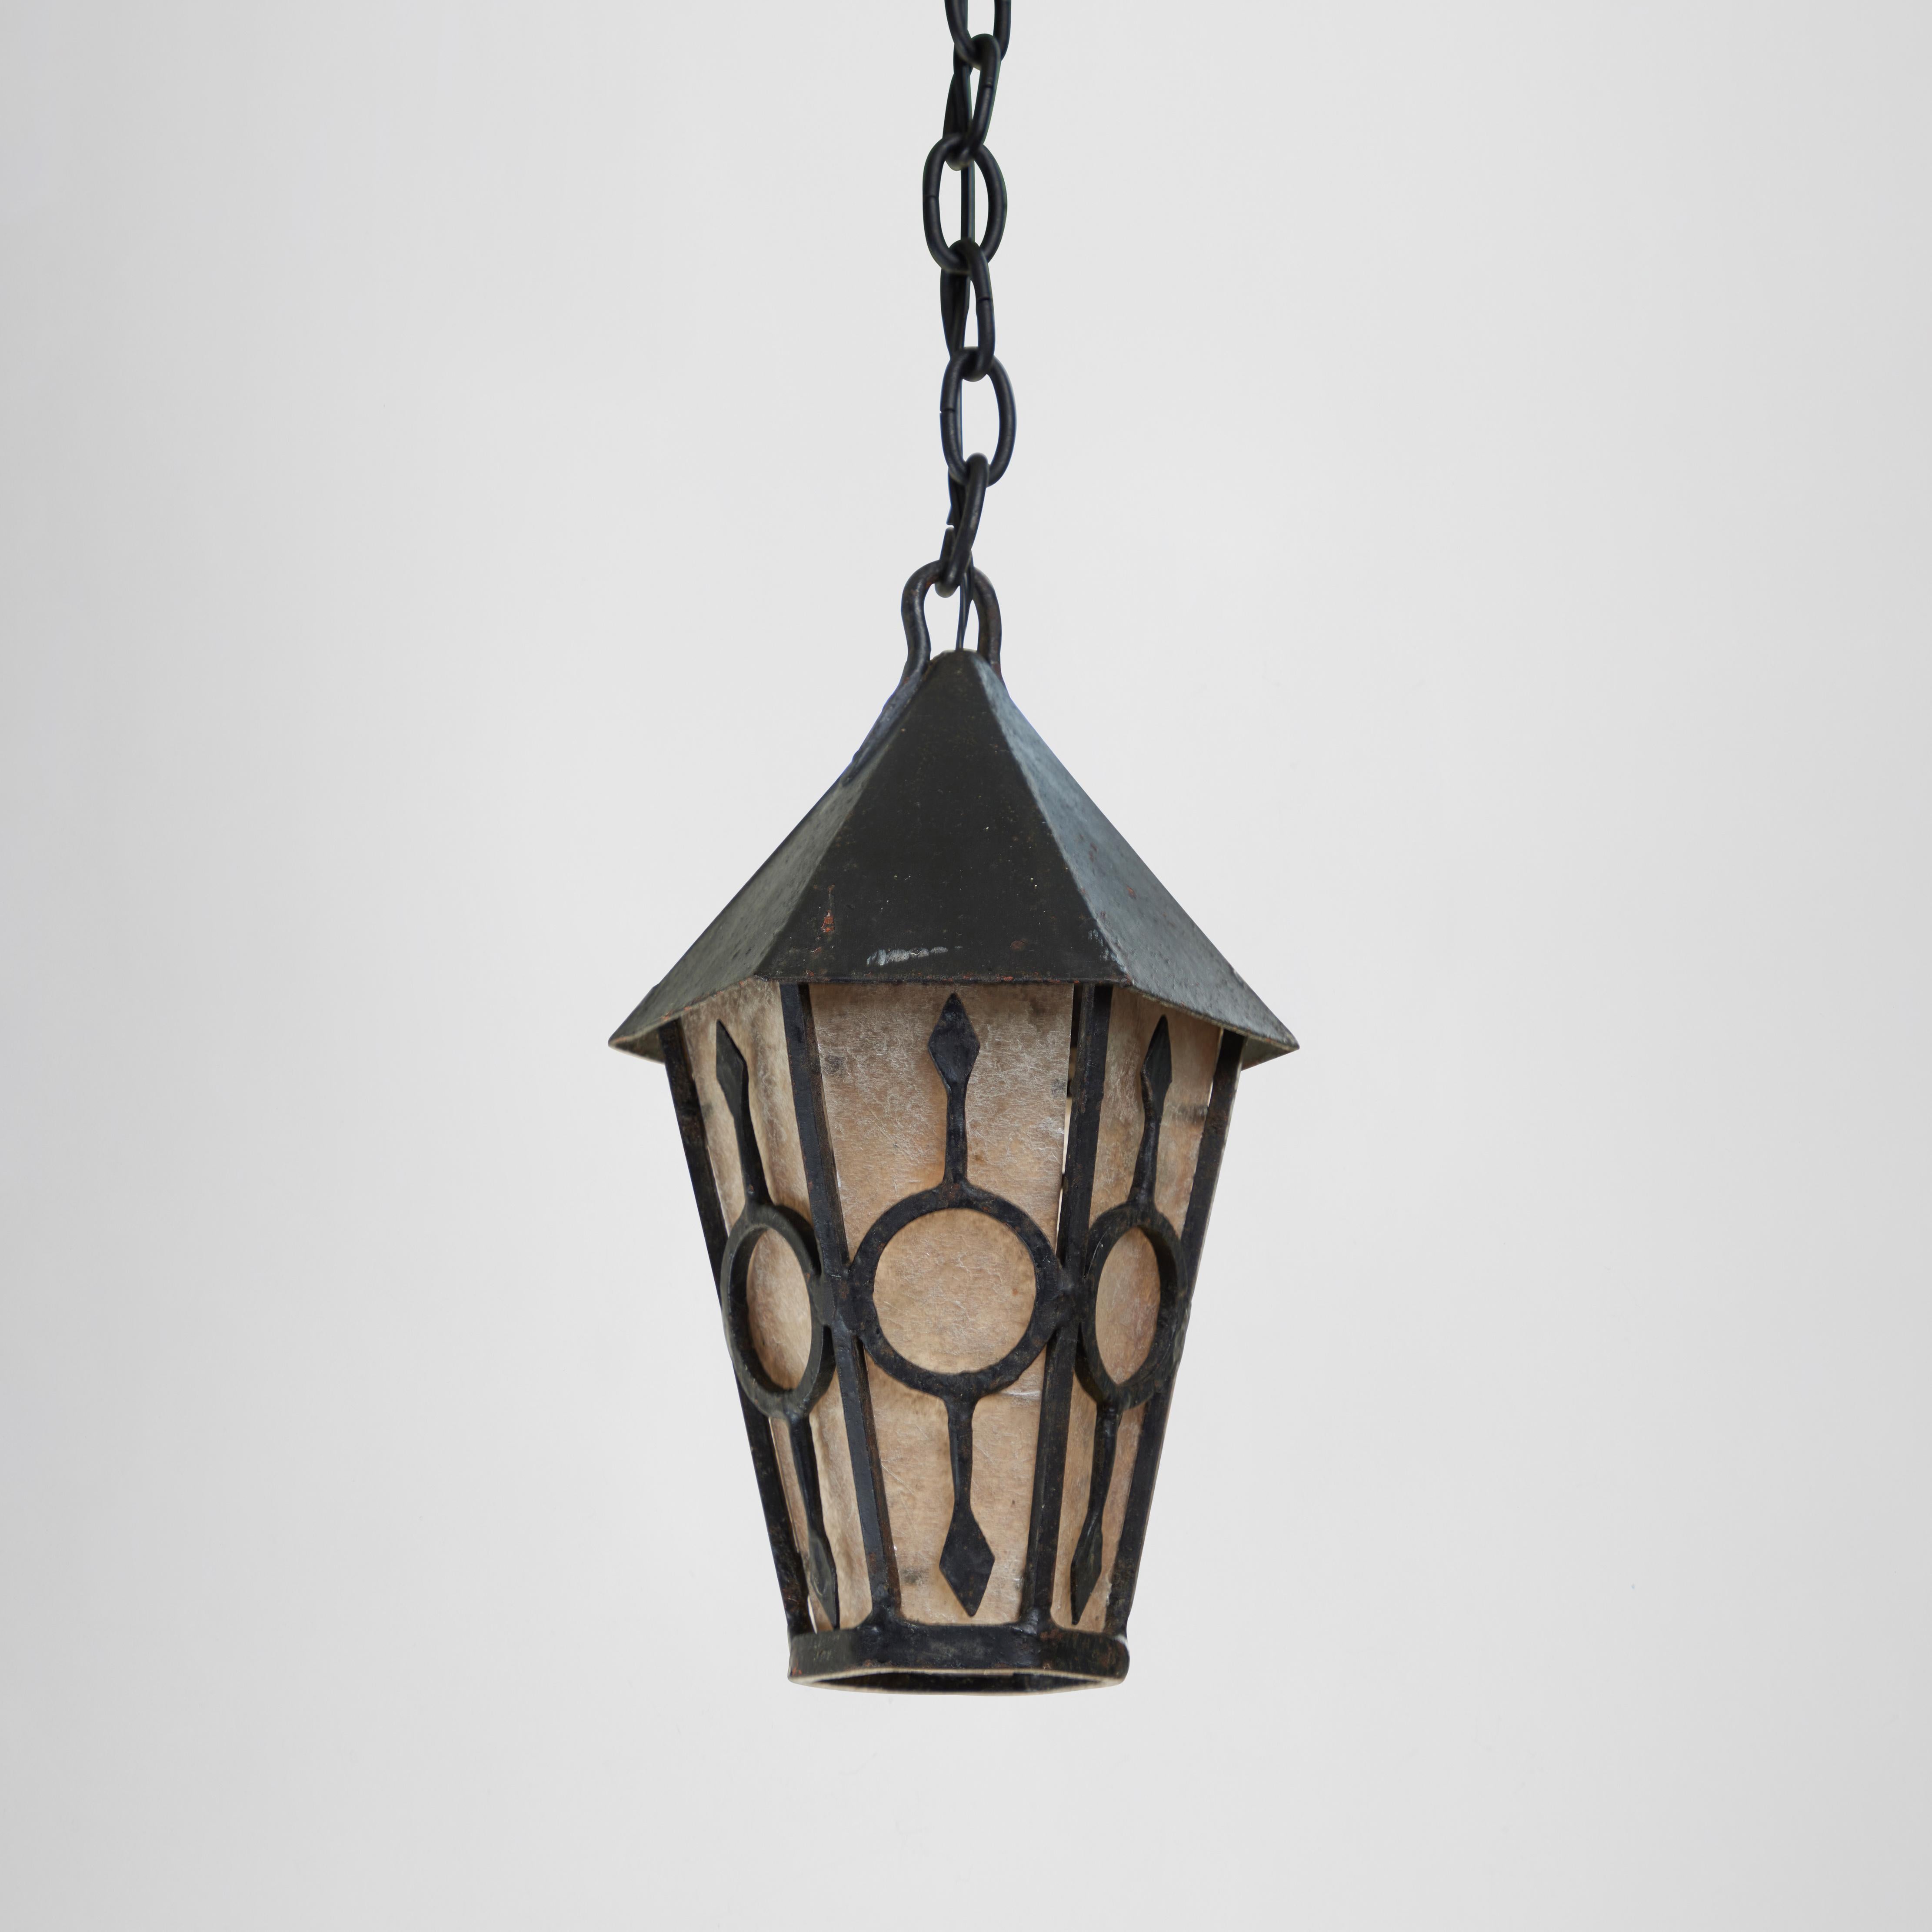 Antique Black Iron Hanging Lantern In Good Condition For Sale In Pasadena, CA